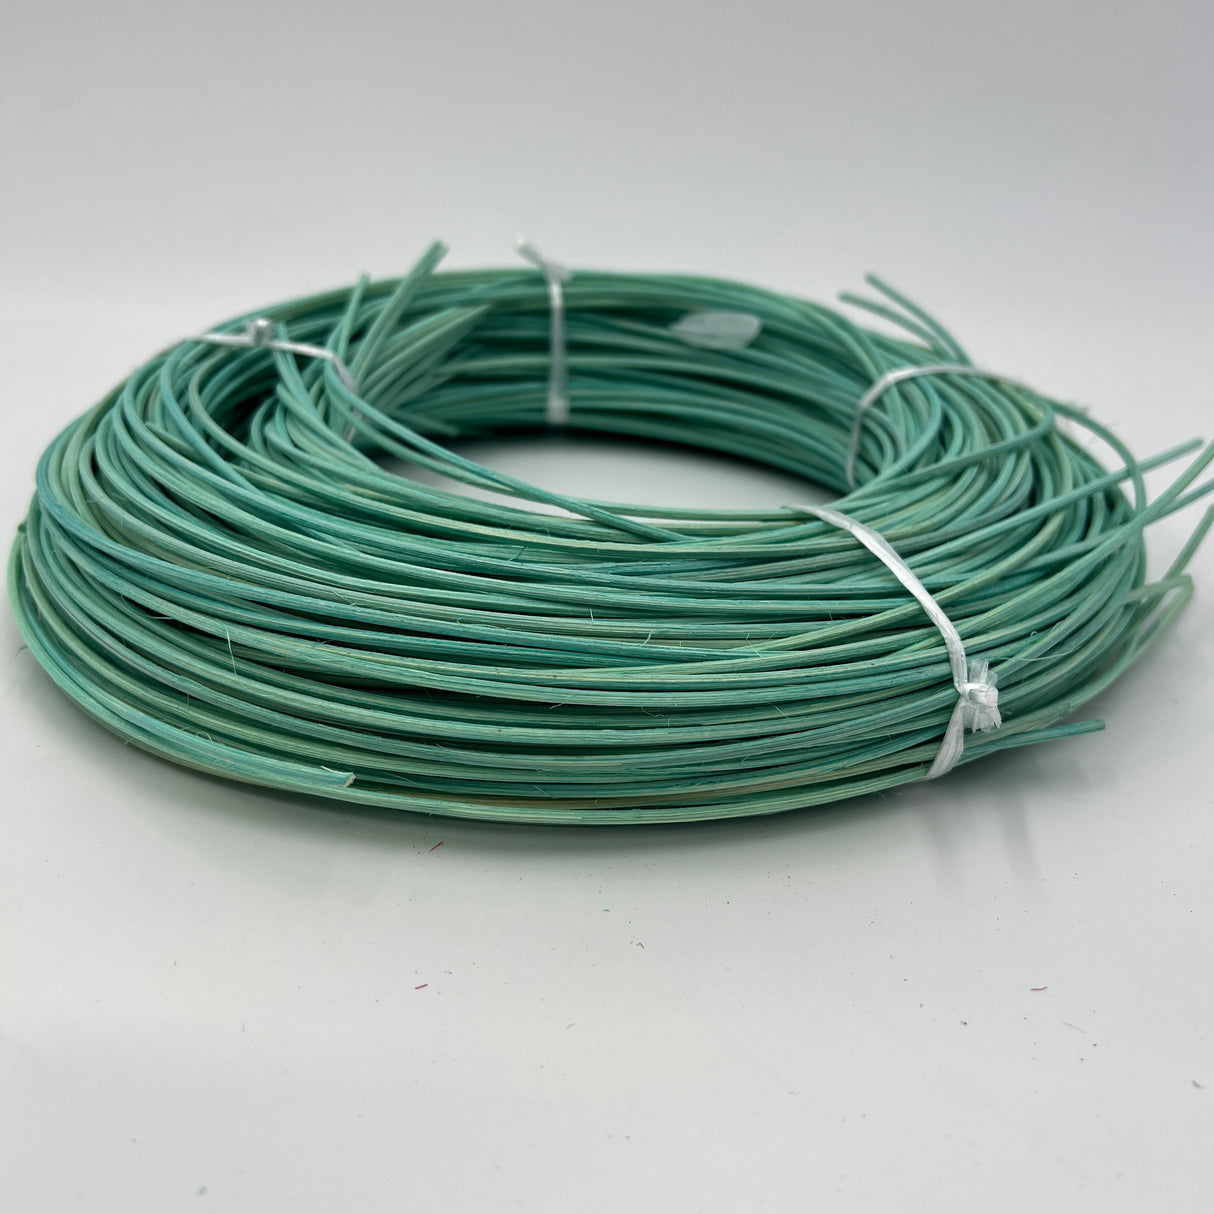 Sea Glass - #3 Round - Dyed Reed (1/2 lb coil)